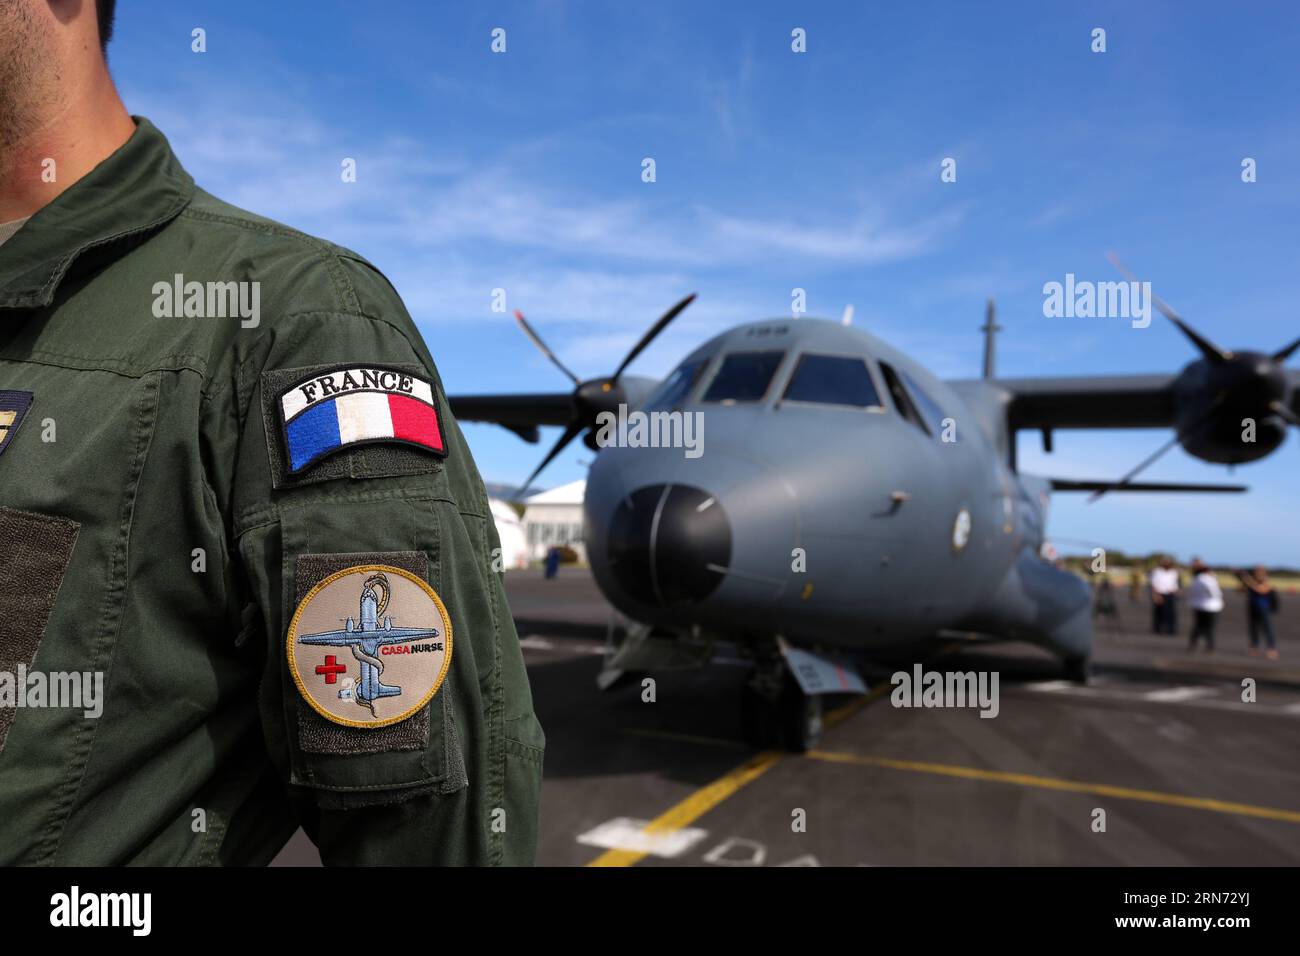 (150814) -- LA REUNION, Aug. 14, 2015 -- A pilot stands near a search plane taking part in the searching mission at an airport in Saint Denis, La Reunion, Aug. 14, 2015. The administrator of Reunion Island Dominique Sorain told the media on Friday the active search for more MH370 debris will continue until Monday. No debris related to the plane has been found in the sea during the 35 hours of a combined search by a CASA search plane of French army and three helicopters, he said. ) (djj) LA REUNION-MH370 DEBRIS-SEARCH PanxSiwei PUBLICATIONxNOTxINxCHN   150814 La Reunion Aug 14 2015 a Pilot stan Stock Photo